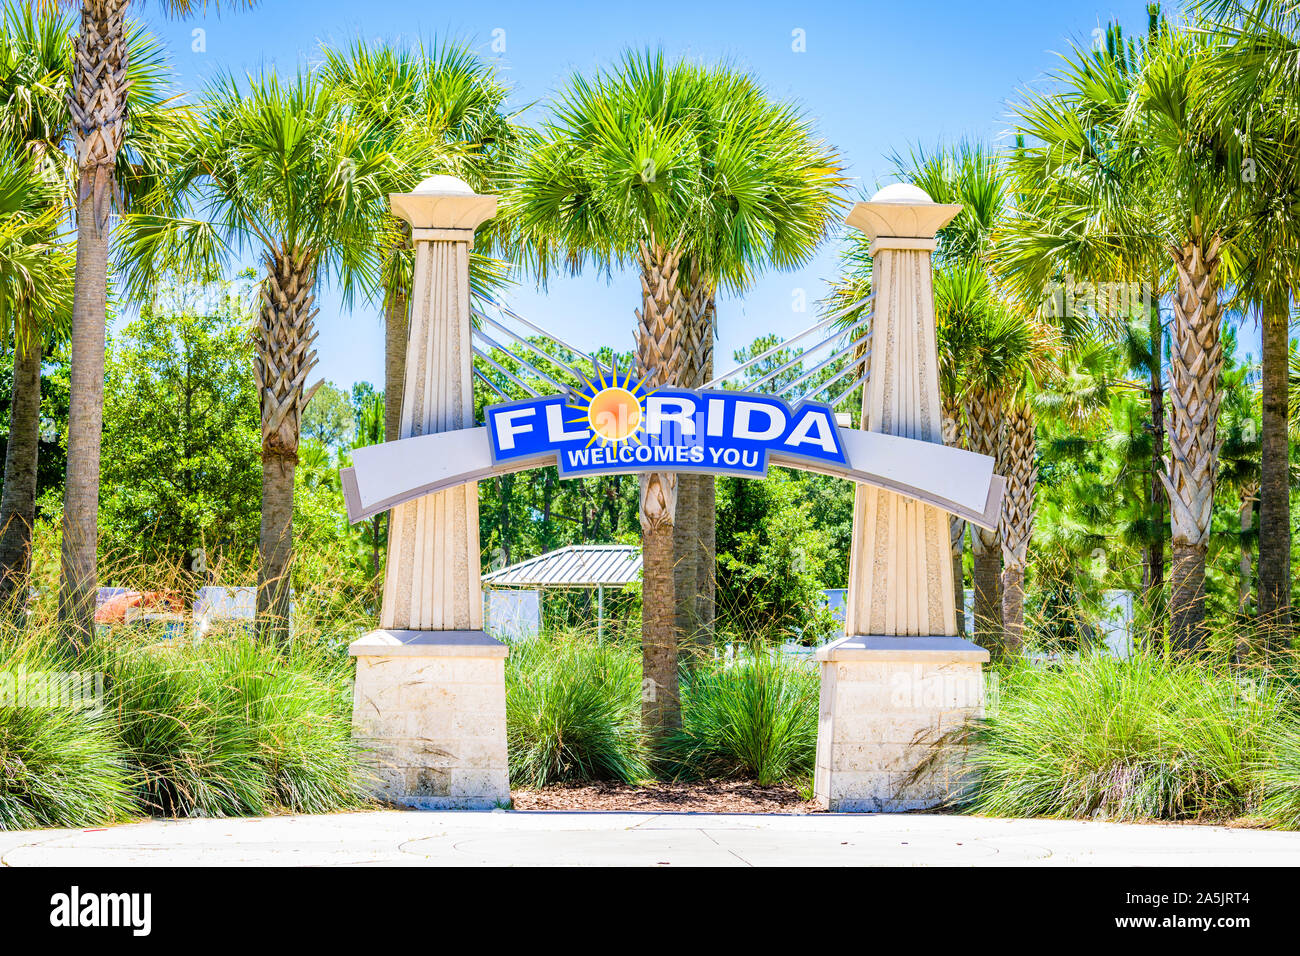 JENNINGS, FLORIDA - MAY 19, 2019: Rest stop sign reading 'Florida Welcomes You'. Stock Photo